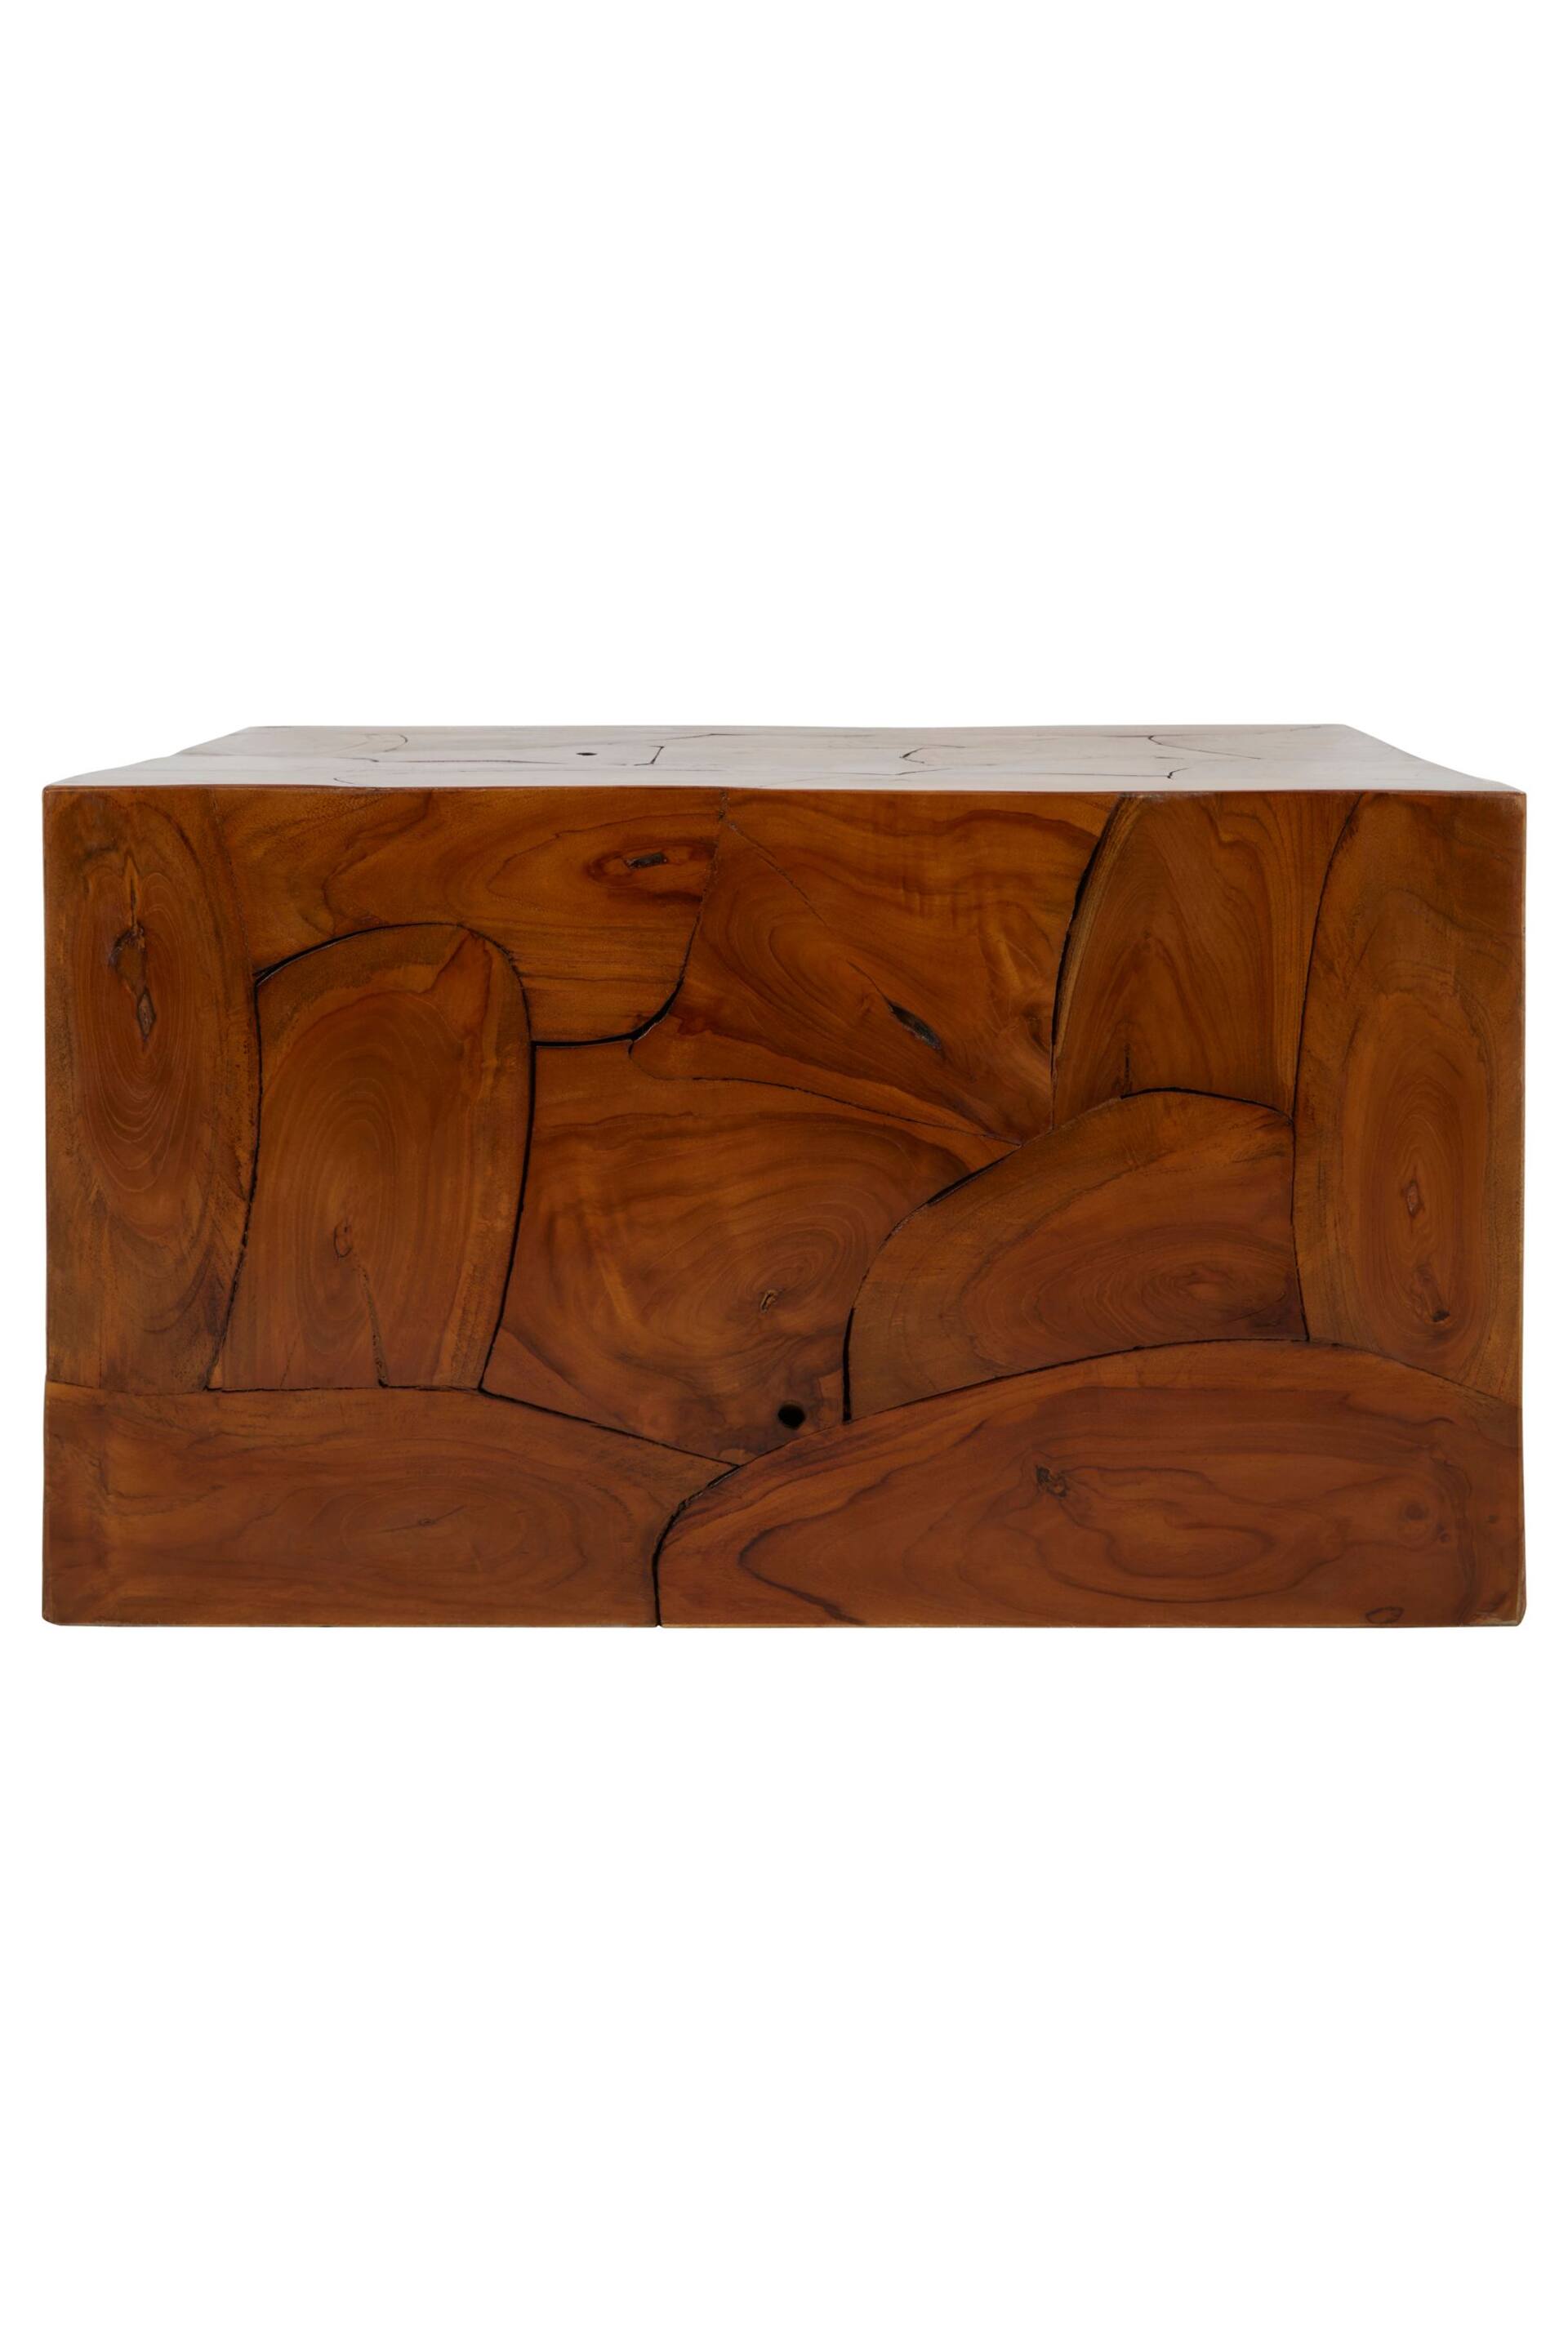 Fifty Five South Brown Surak Teak Wood Coffee Table - Image 6 of 6